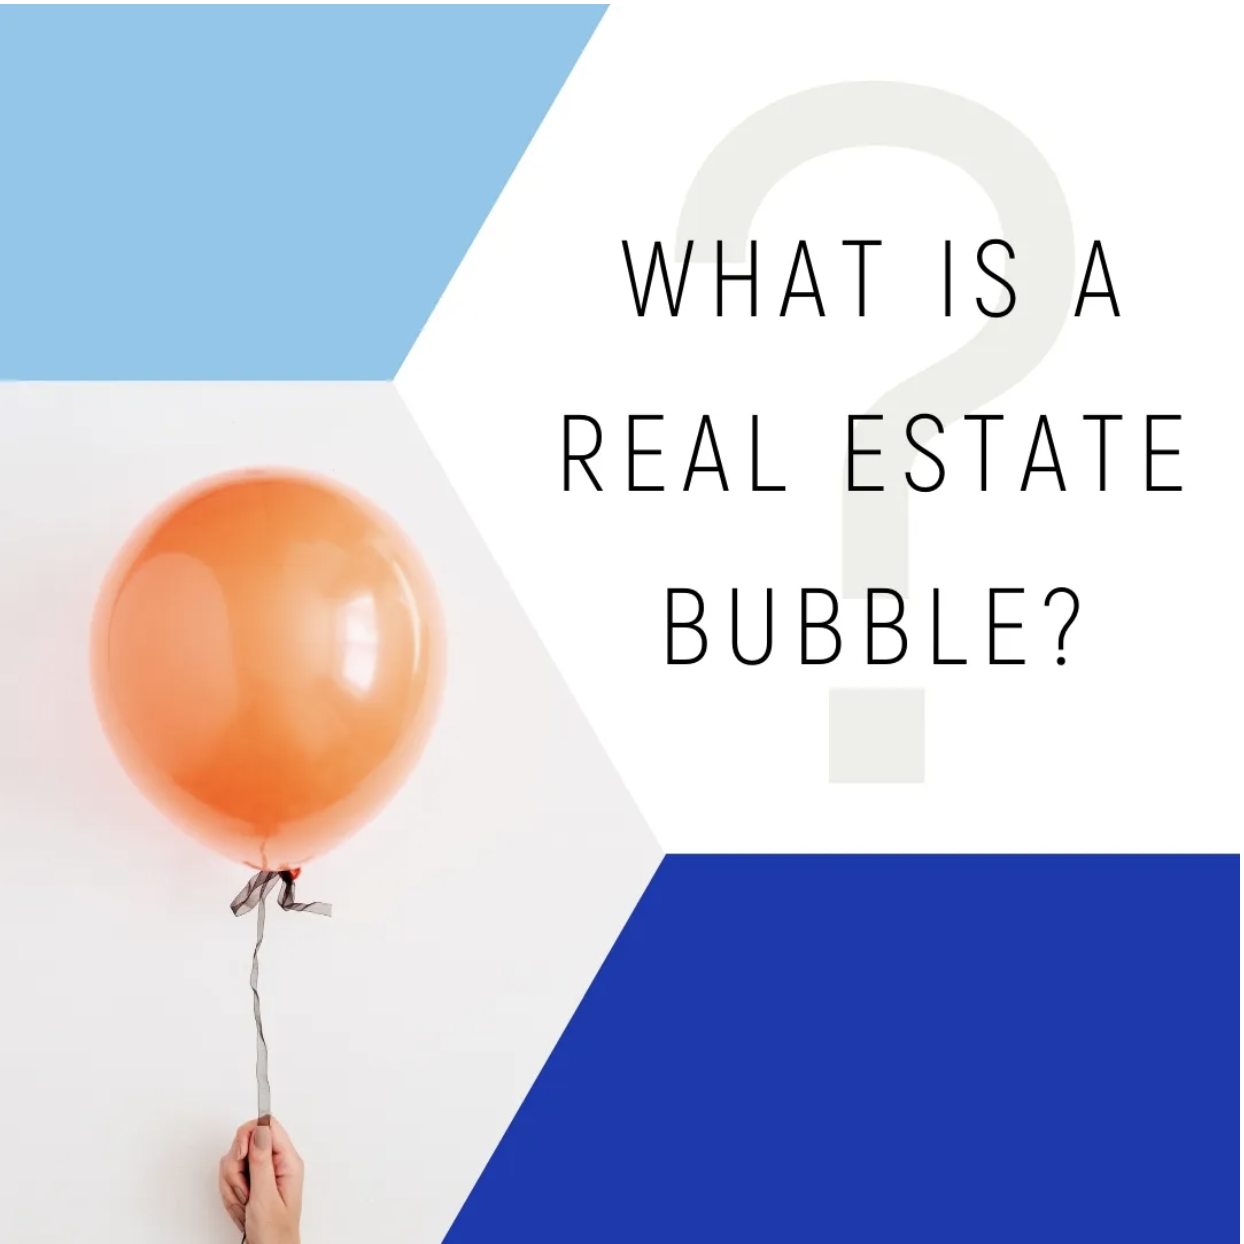 ARE WE FACING A REAL ESTATE BUBBLE?